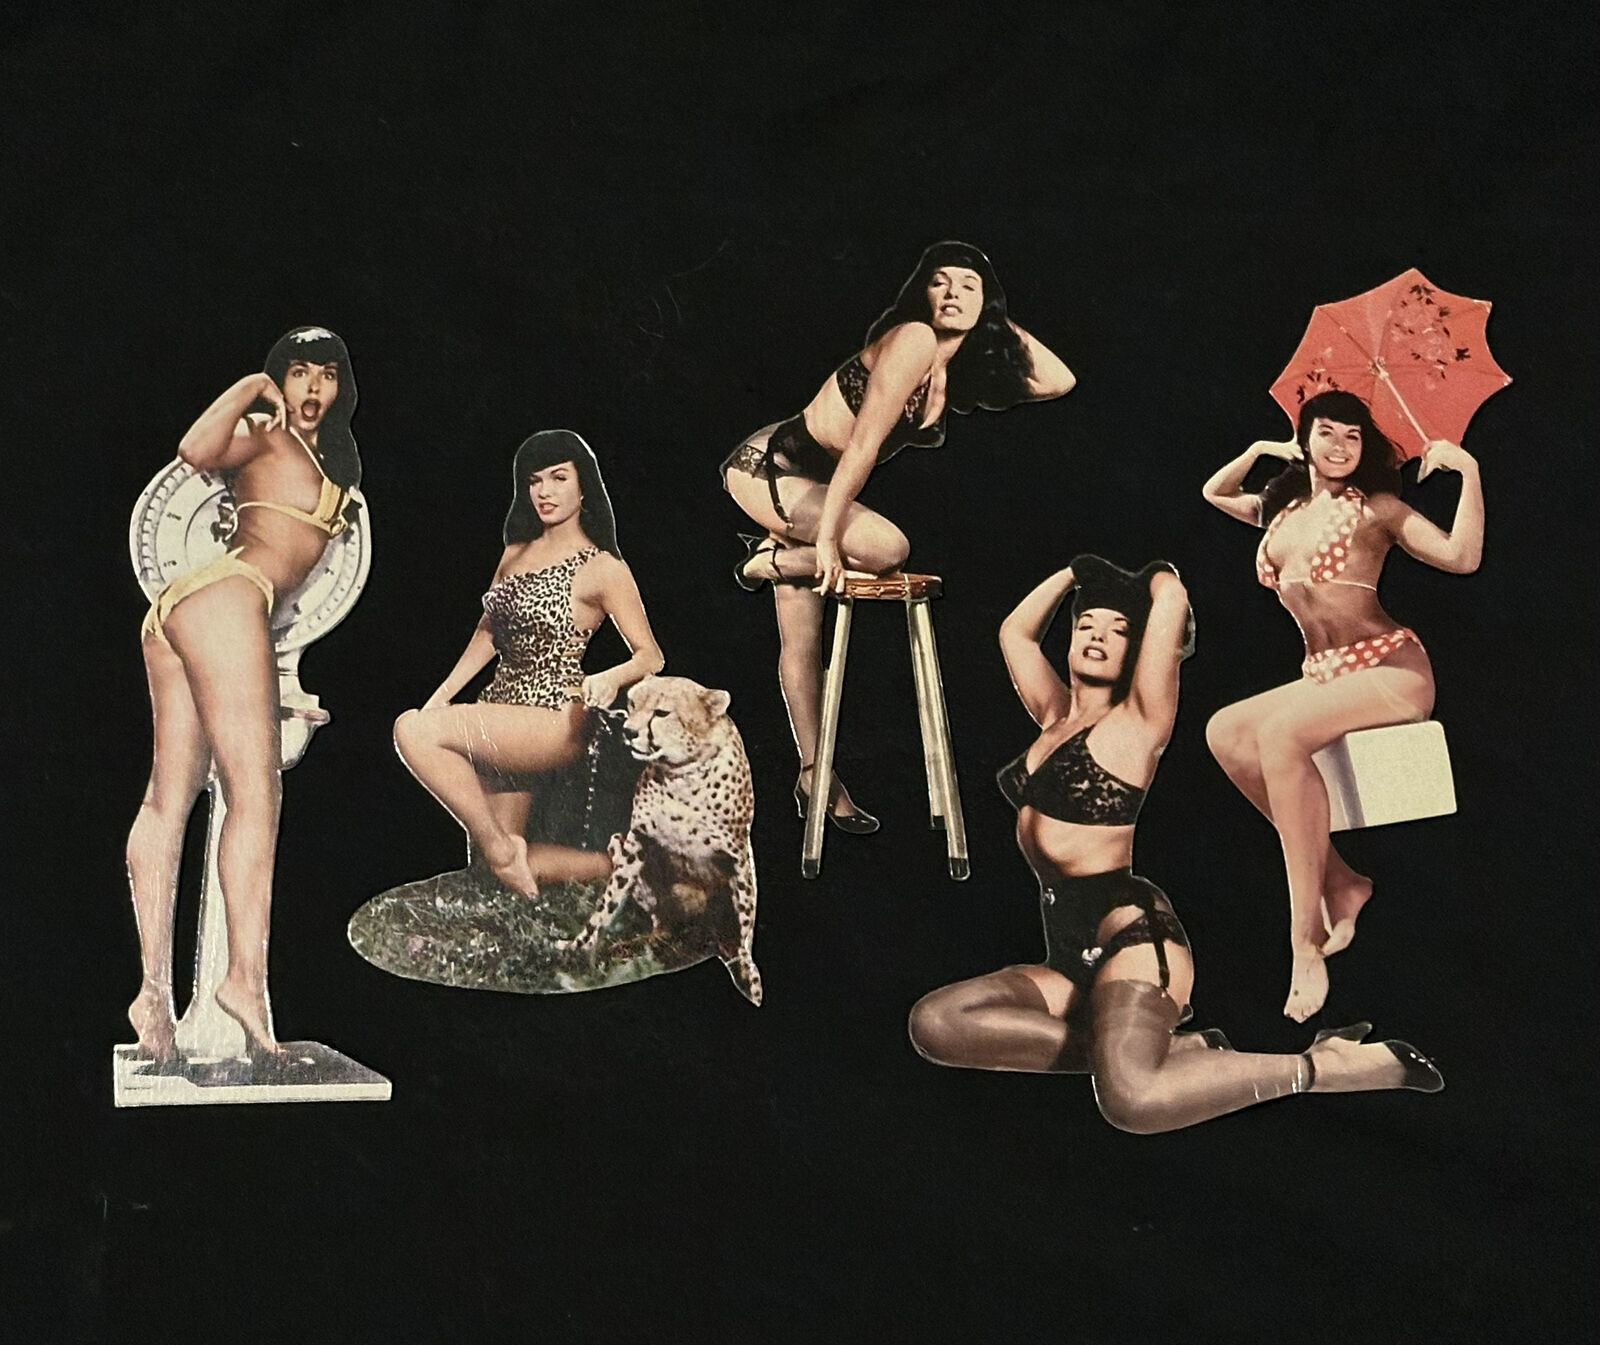 Rare Betty Page Magnets by Bunny Yeager. Bettie Page pin-up